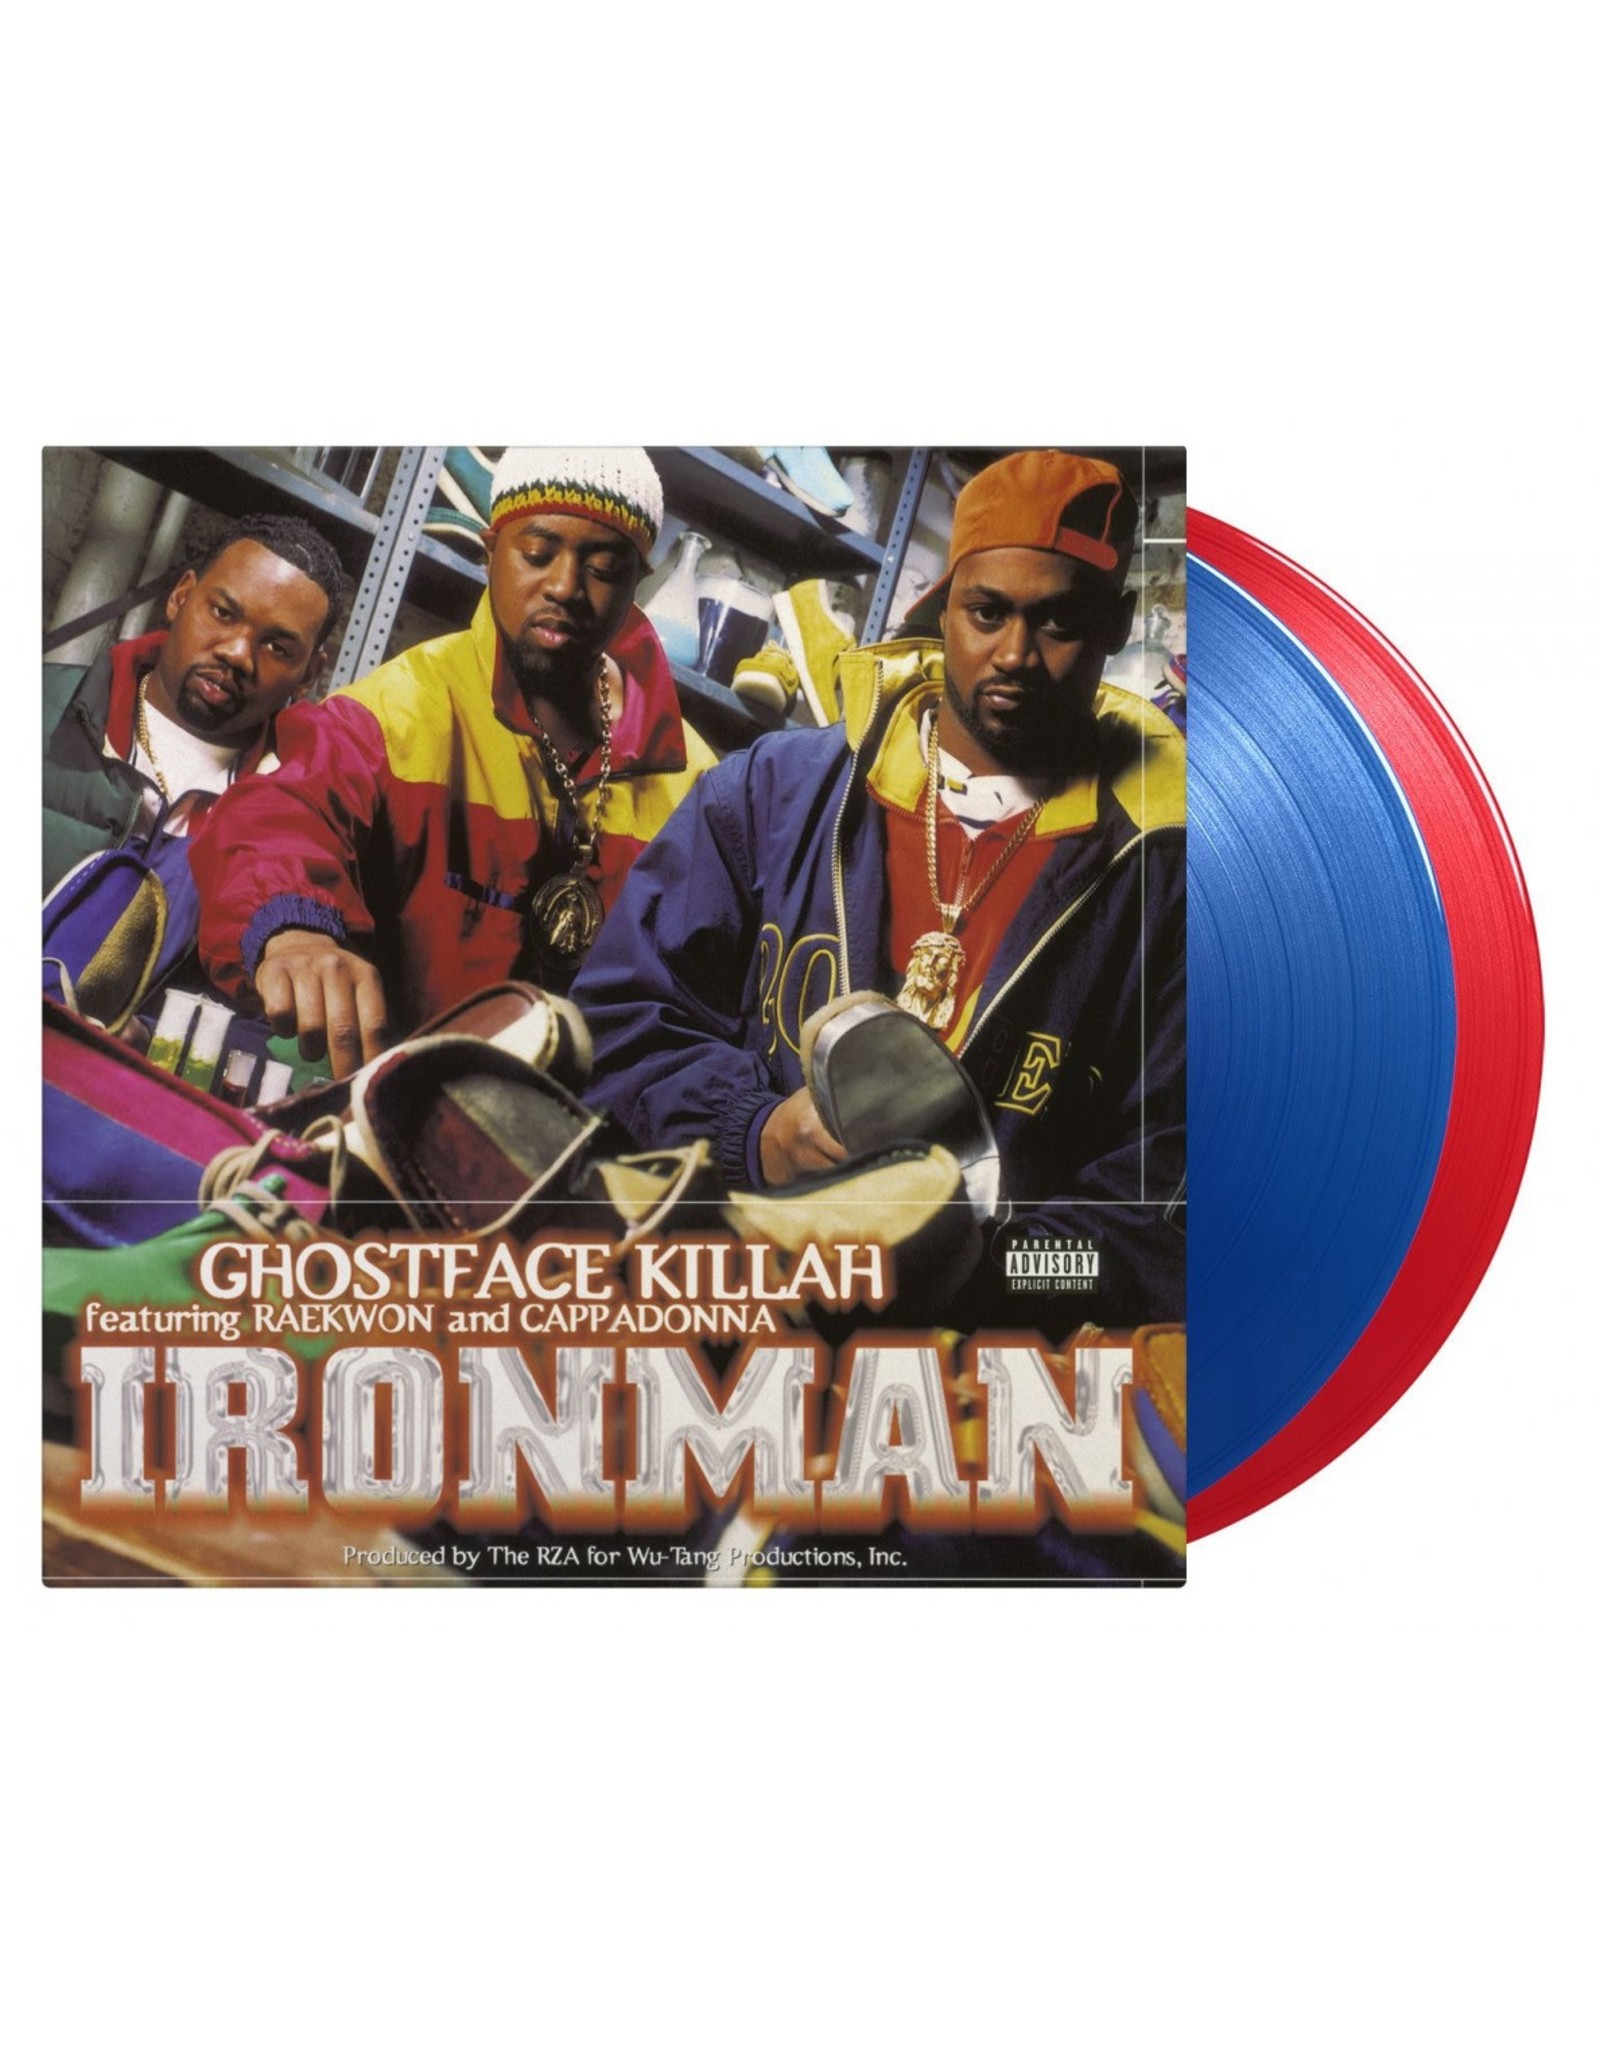 Ghostface Killah - Ironman LIMITED TRANSLUCENT BLUE AND RED LP